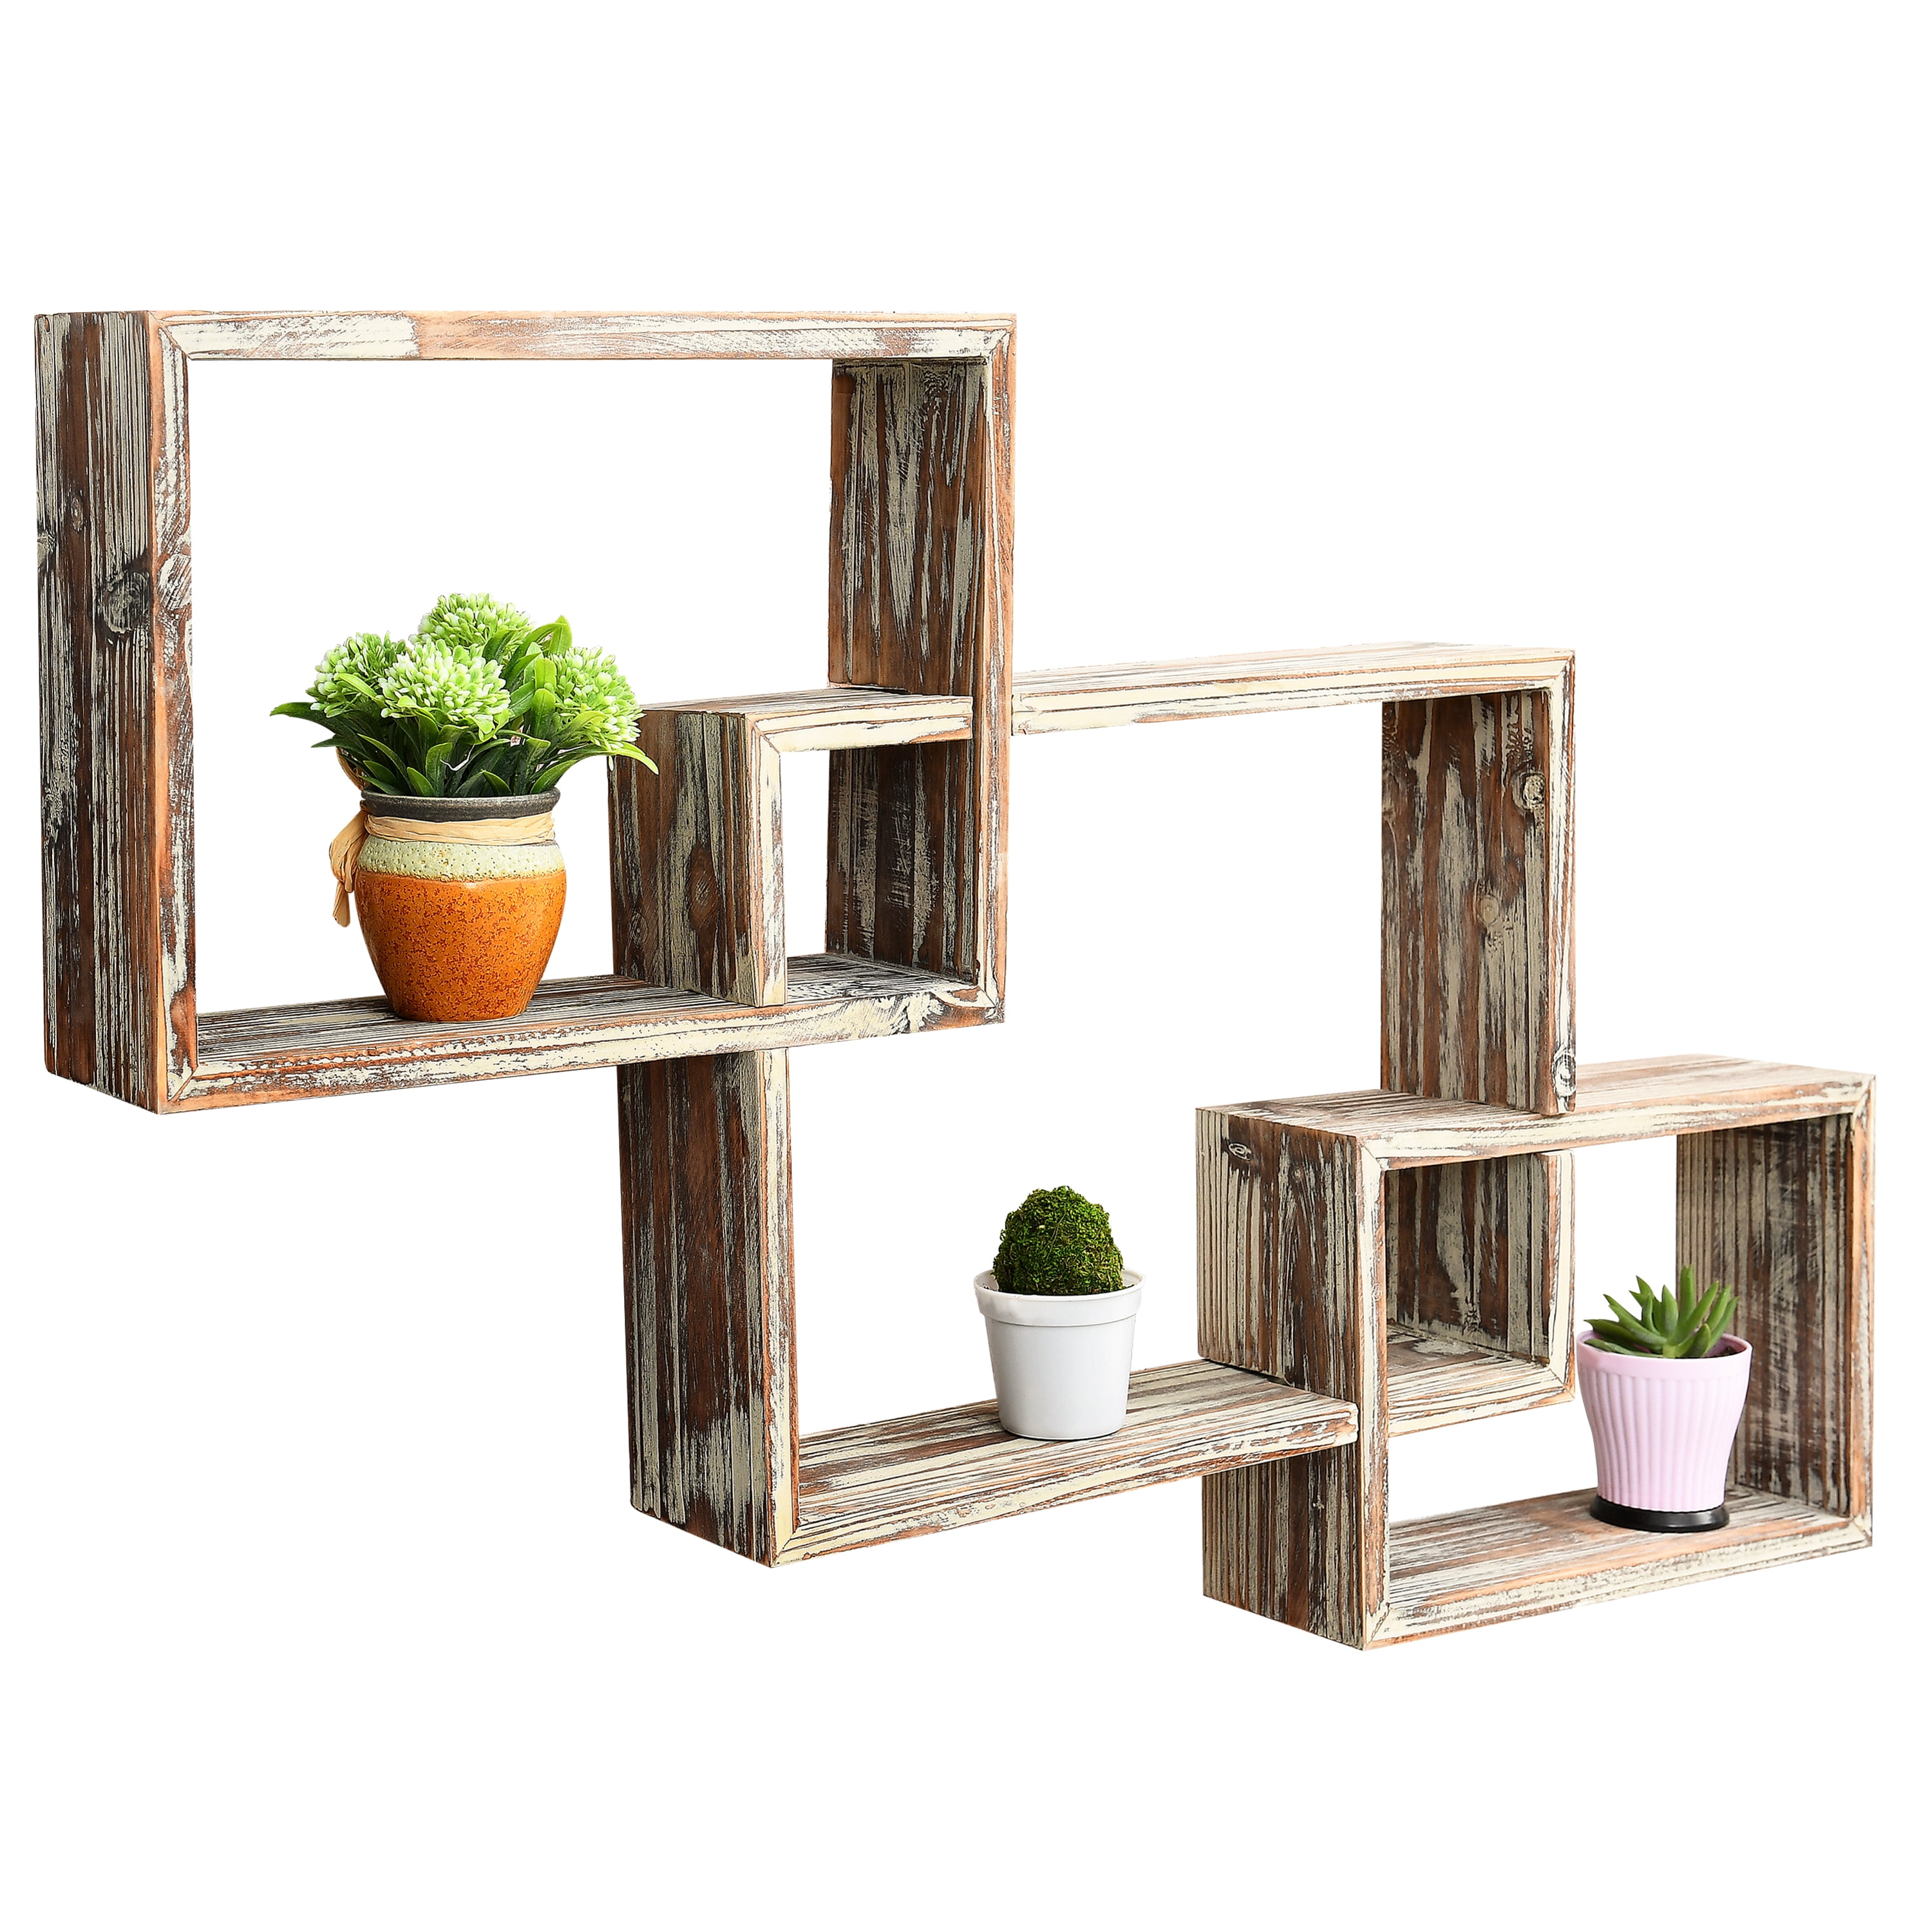 Easy to Mounting Wall Shelf Set of 2,Natural Bamboo Floating Shelves,Wall Mount Decorative Wood Shelf,Wide Wooden Wall Display Shelves,Space Saving,Waterproof Natural Bamboo Colour, 16 x 6.7